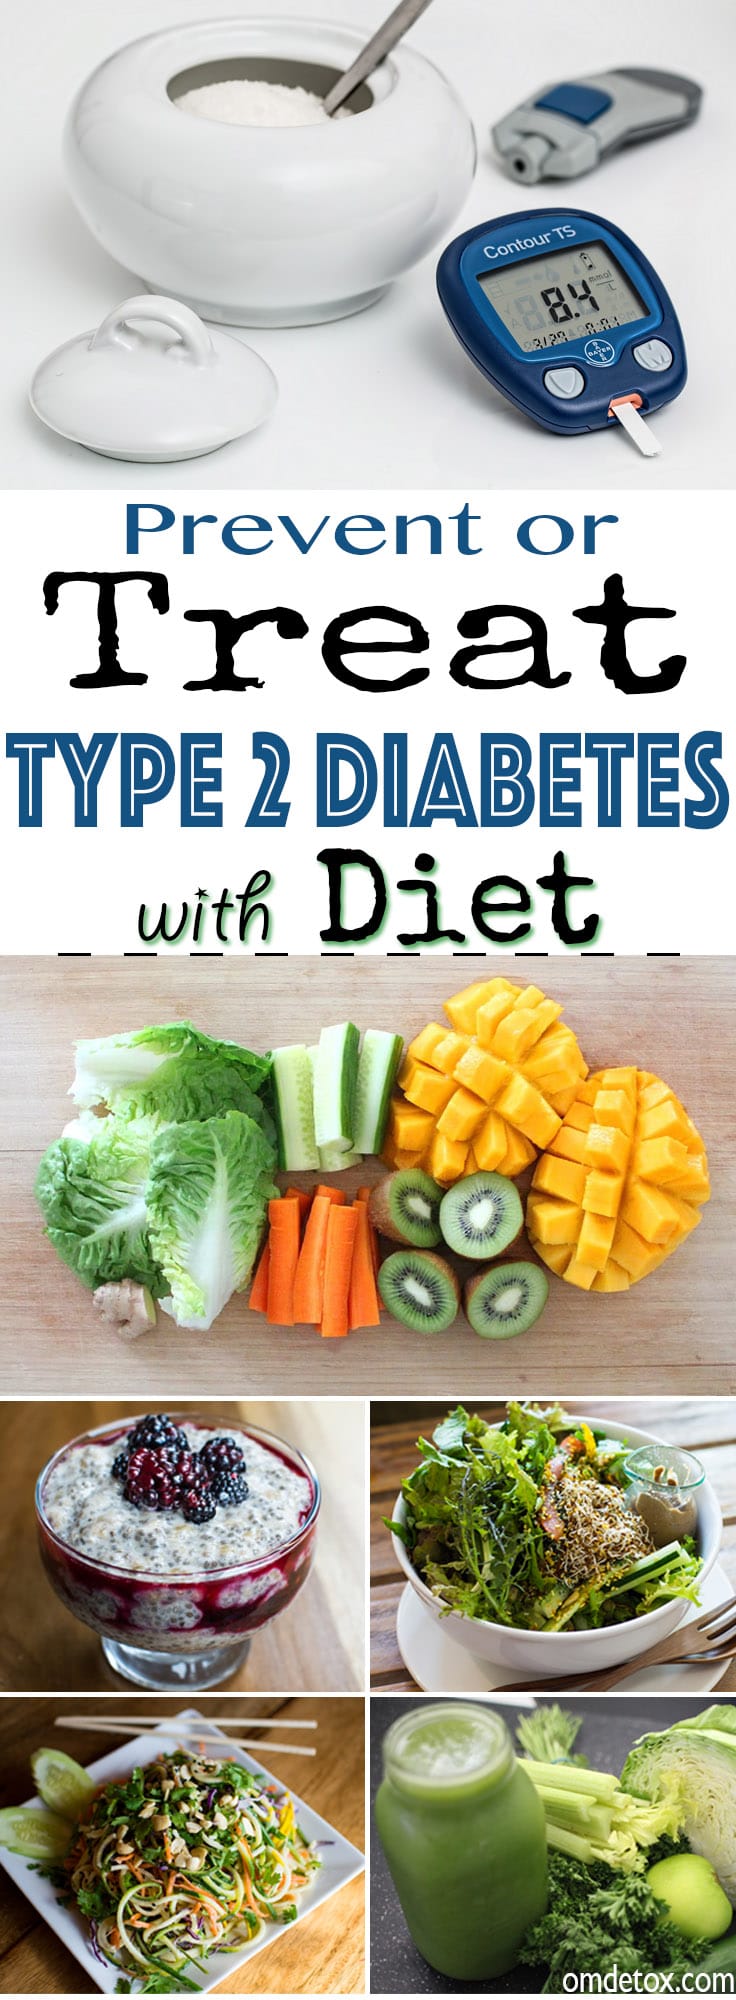 Treating Type 2 Diabetes with Diet, control your Diabetes